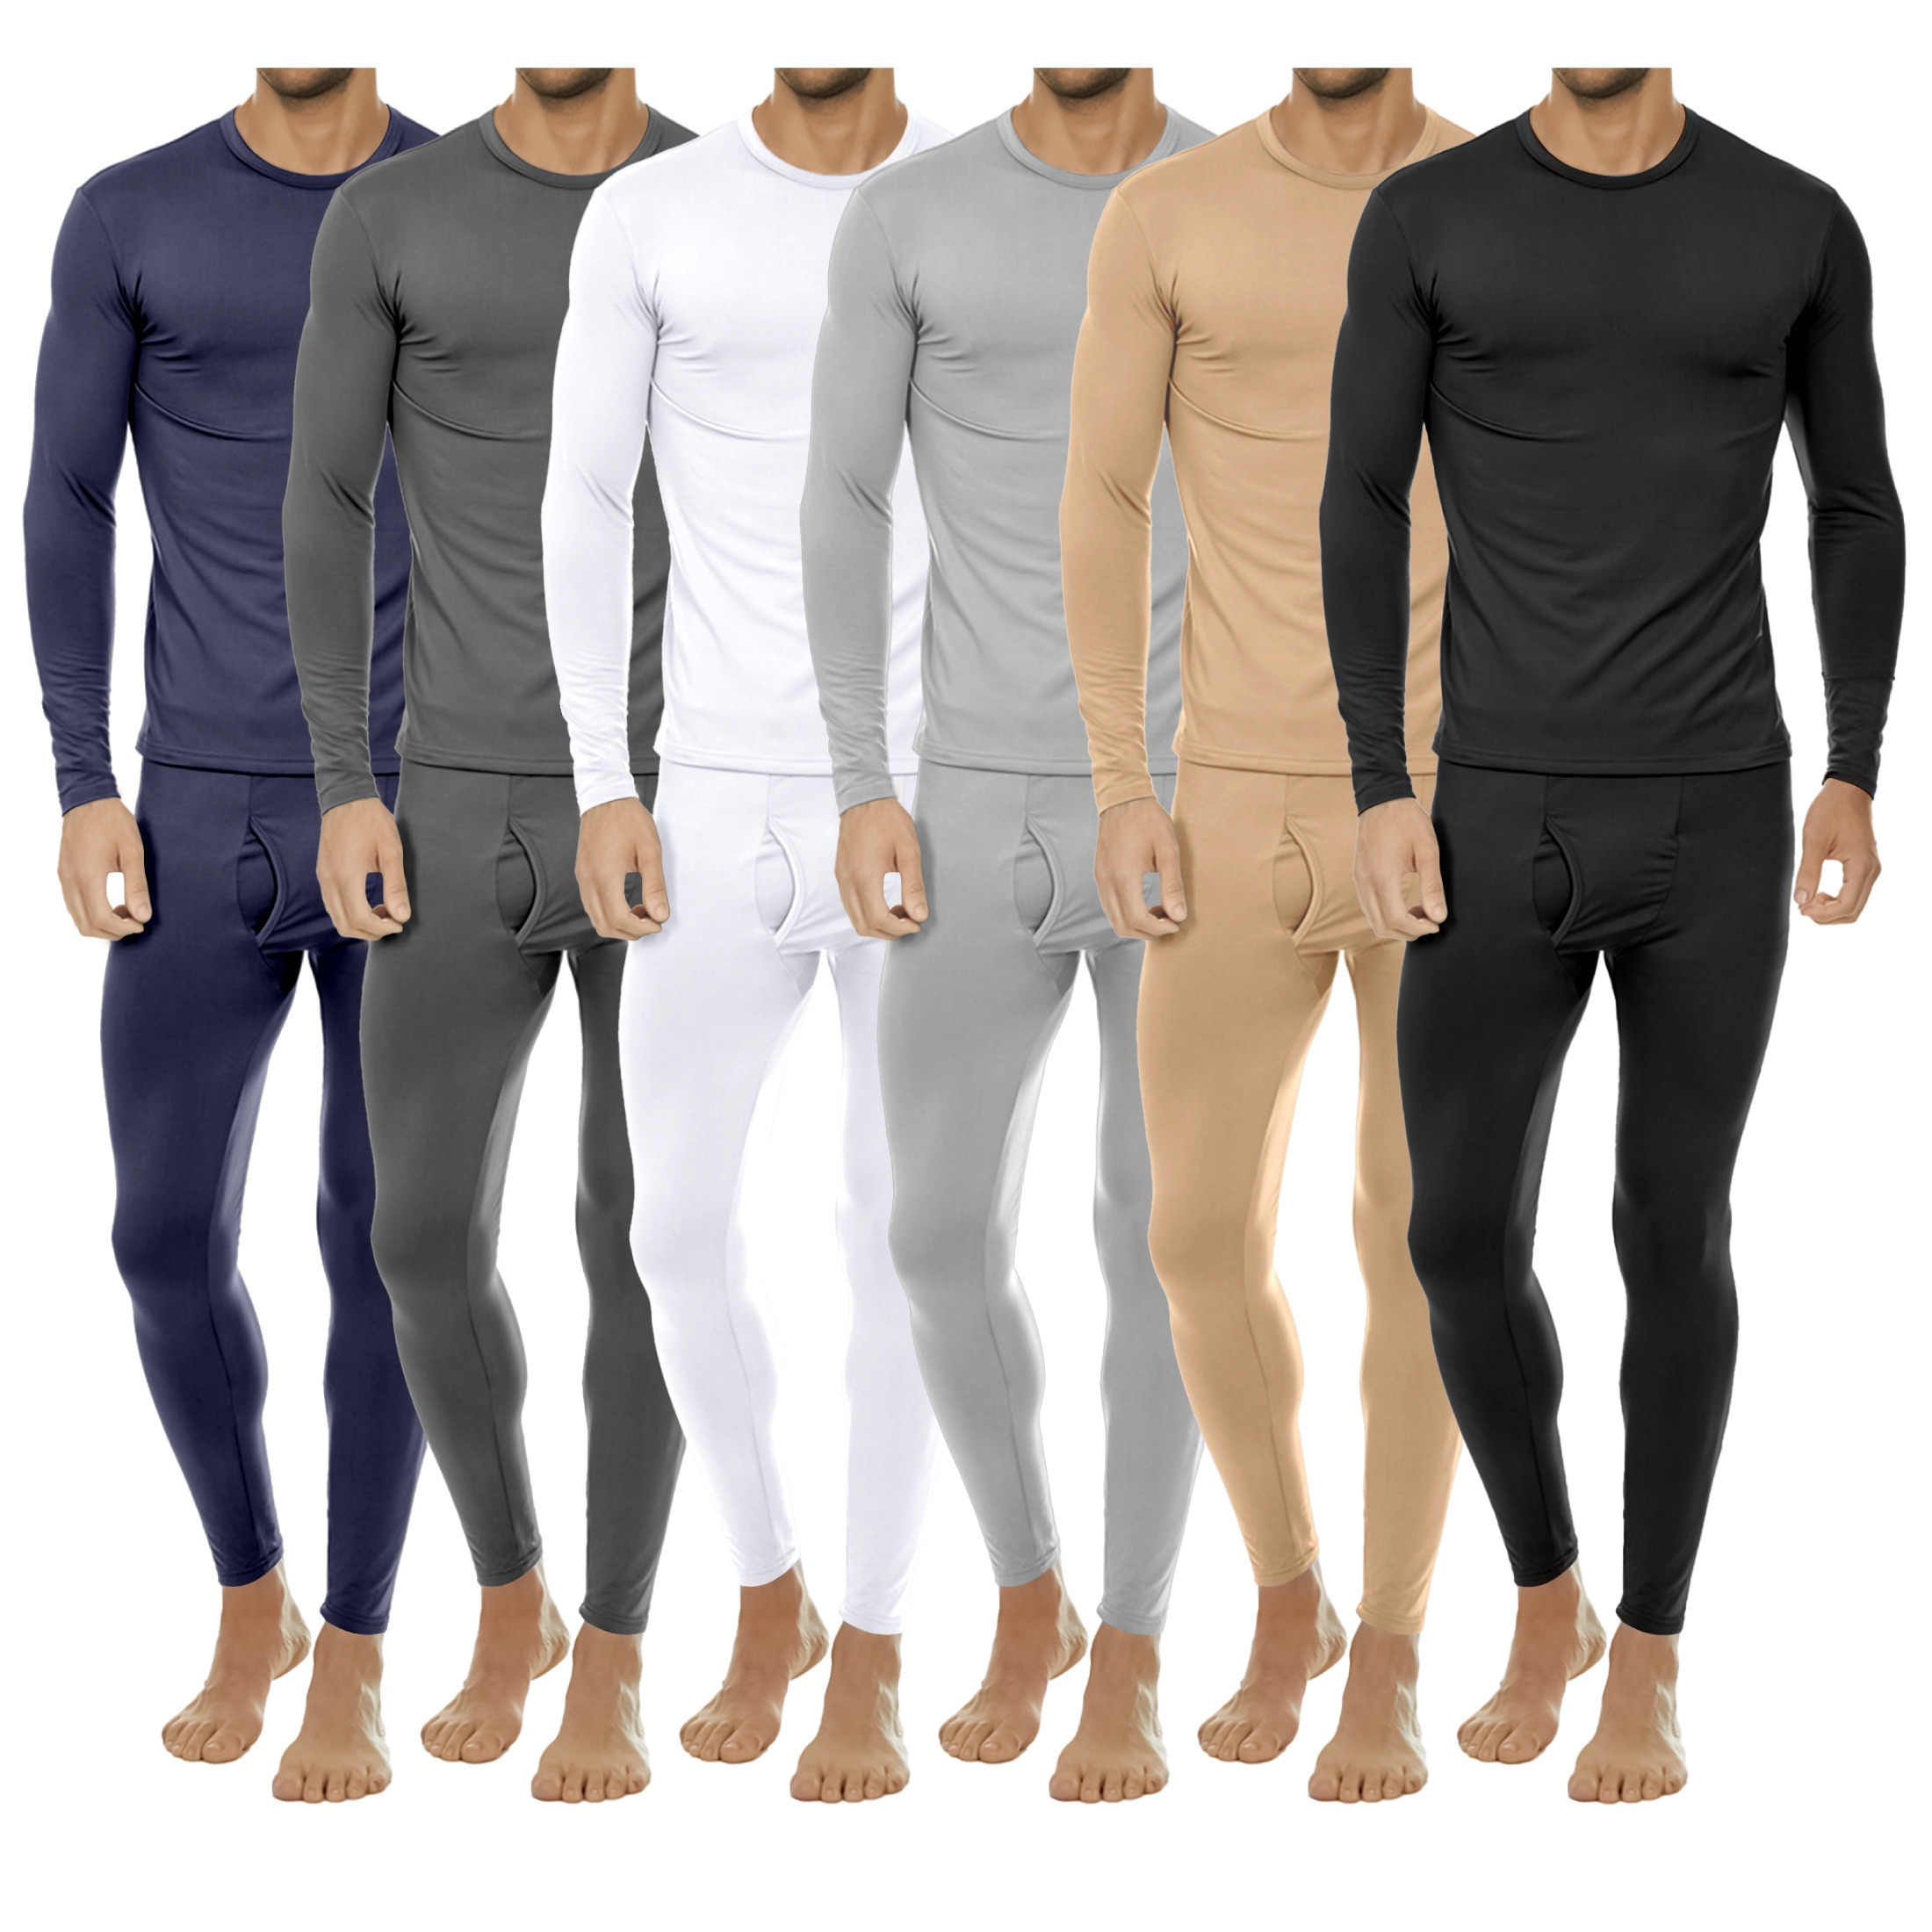 4-Piece: Men's Fleece Lined Thermal Set For Cold Weather - X-Large